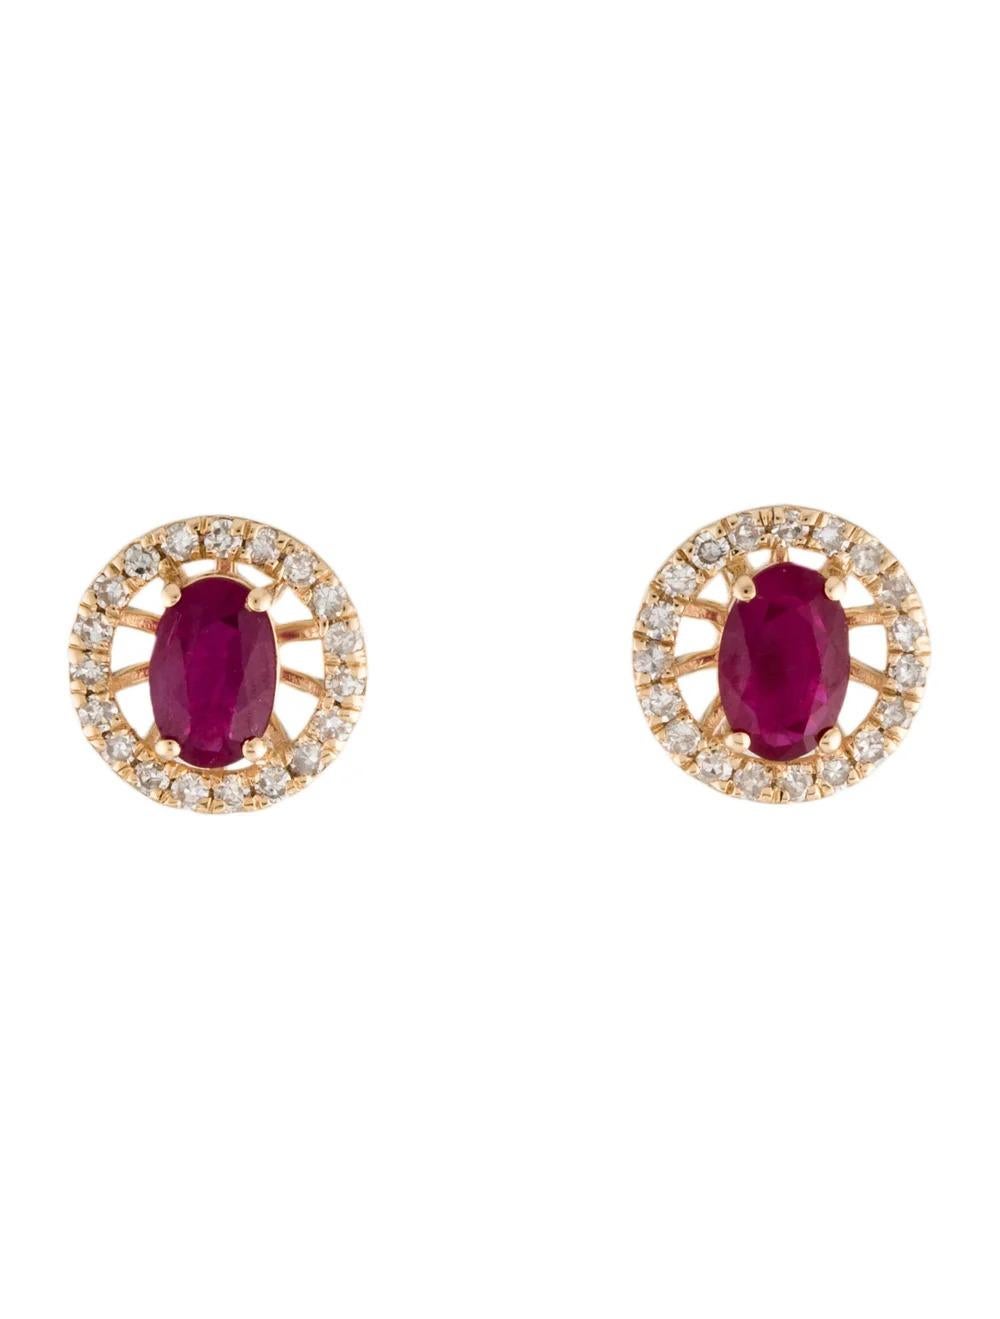 Introducing an exquisite pair of fine jewelry: the 14K Yellow Gold Ruby & Diamond Stud Earrings. These stunning earrings feature two faceted oval rubies, totaling 0.84 carats, surrounded by 38 sparkling single-cut diamonds, totaling 0.22